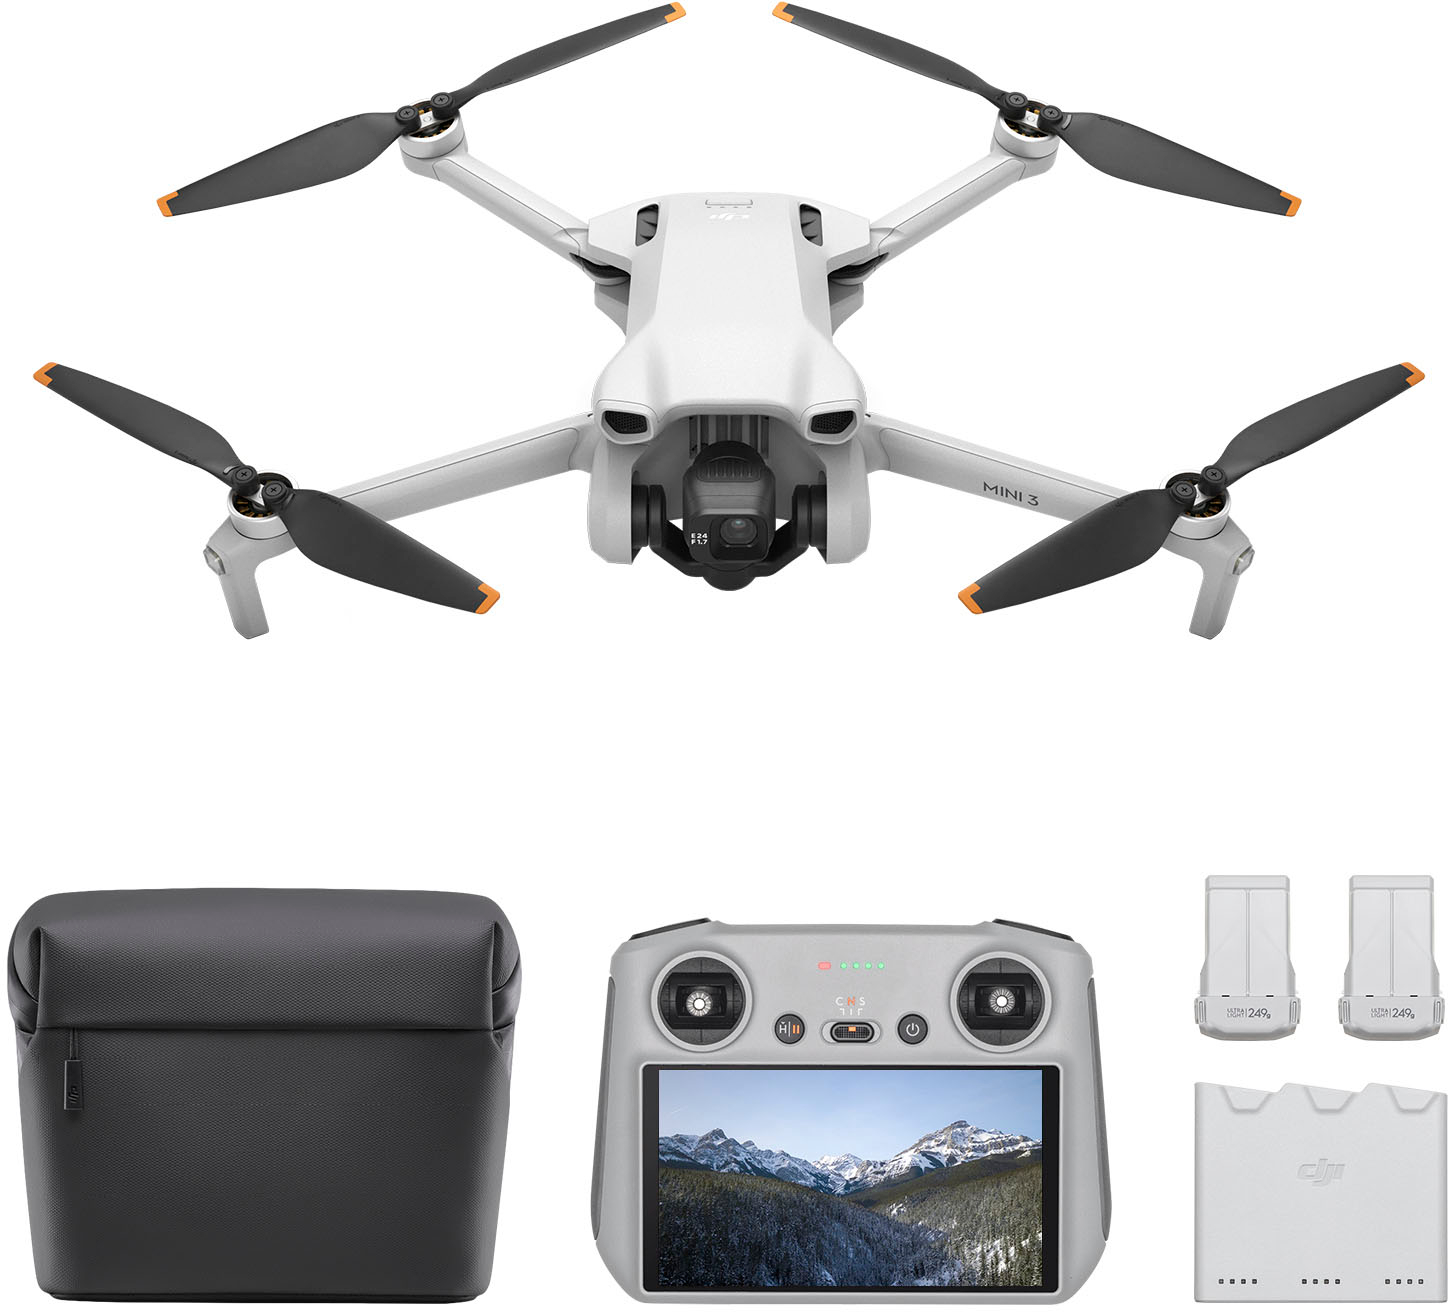 DJI - Mini 3 Fly More Combo Drone and Remote Control with Built-in Screen - Gray